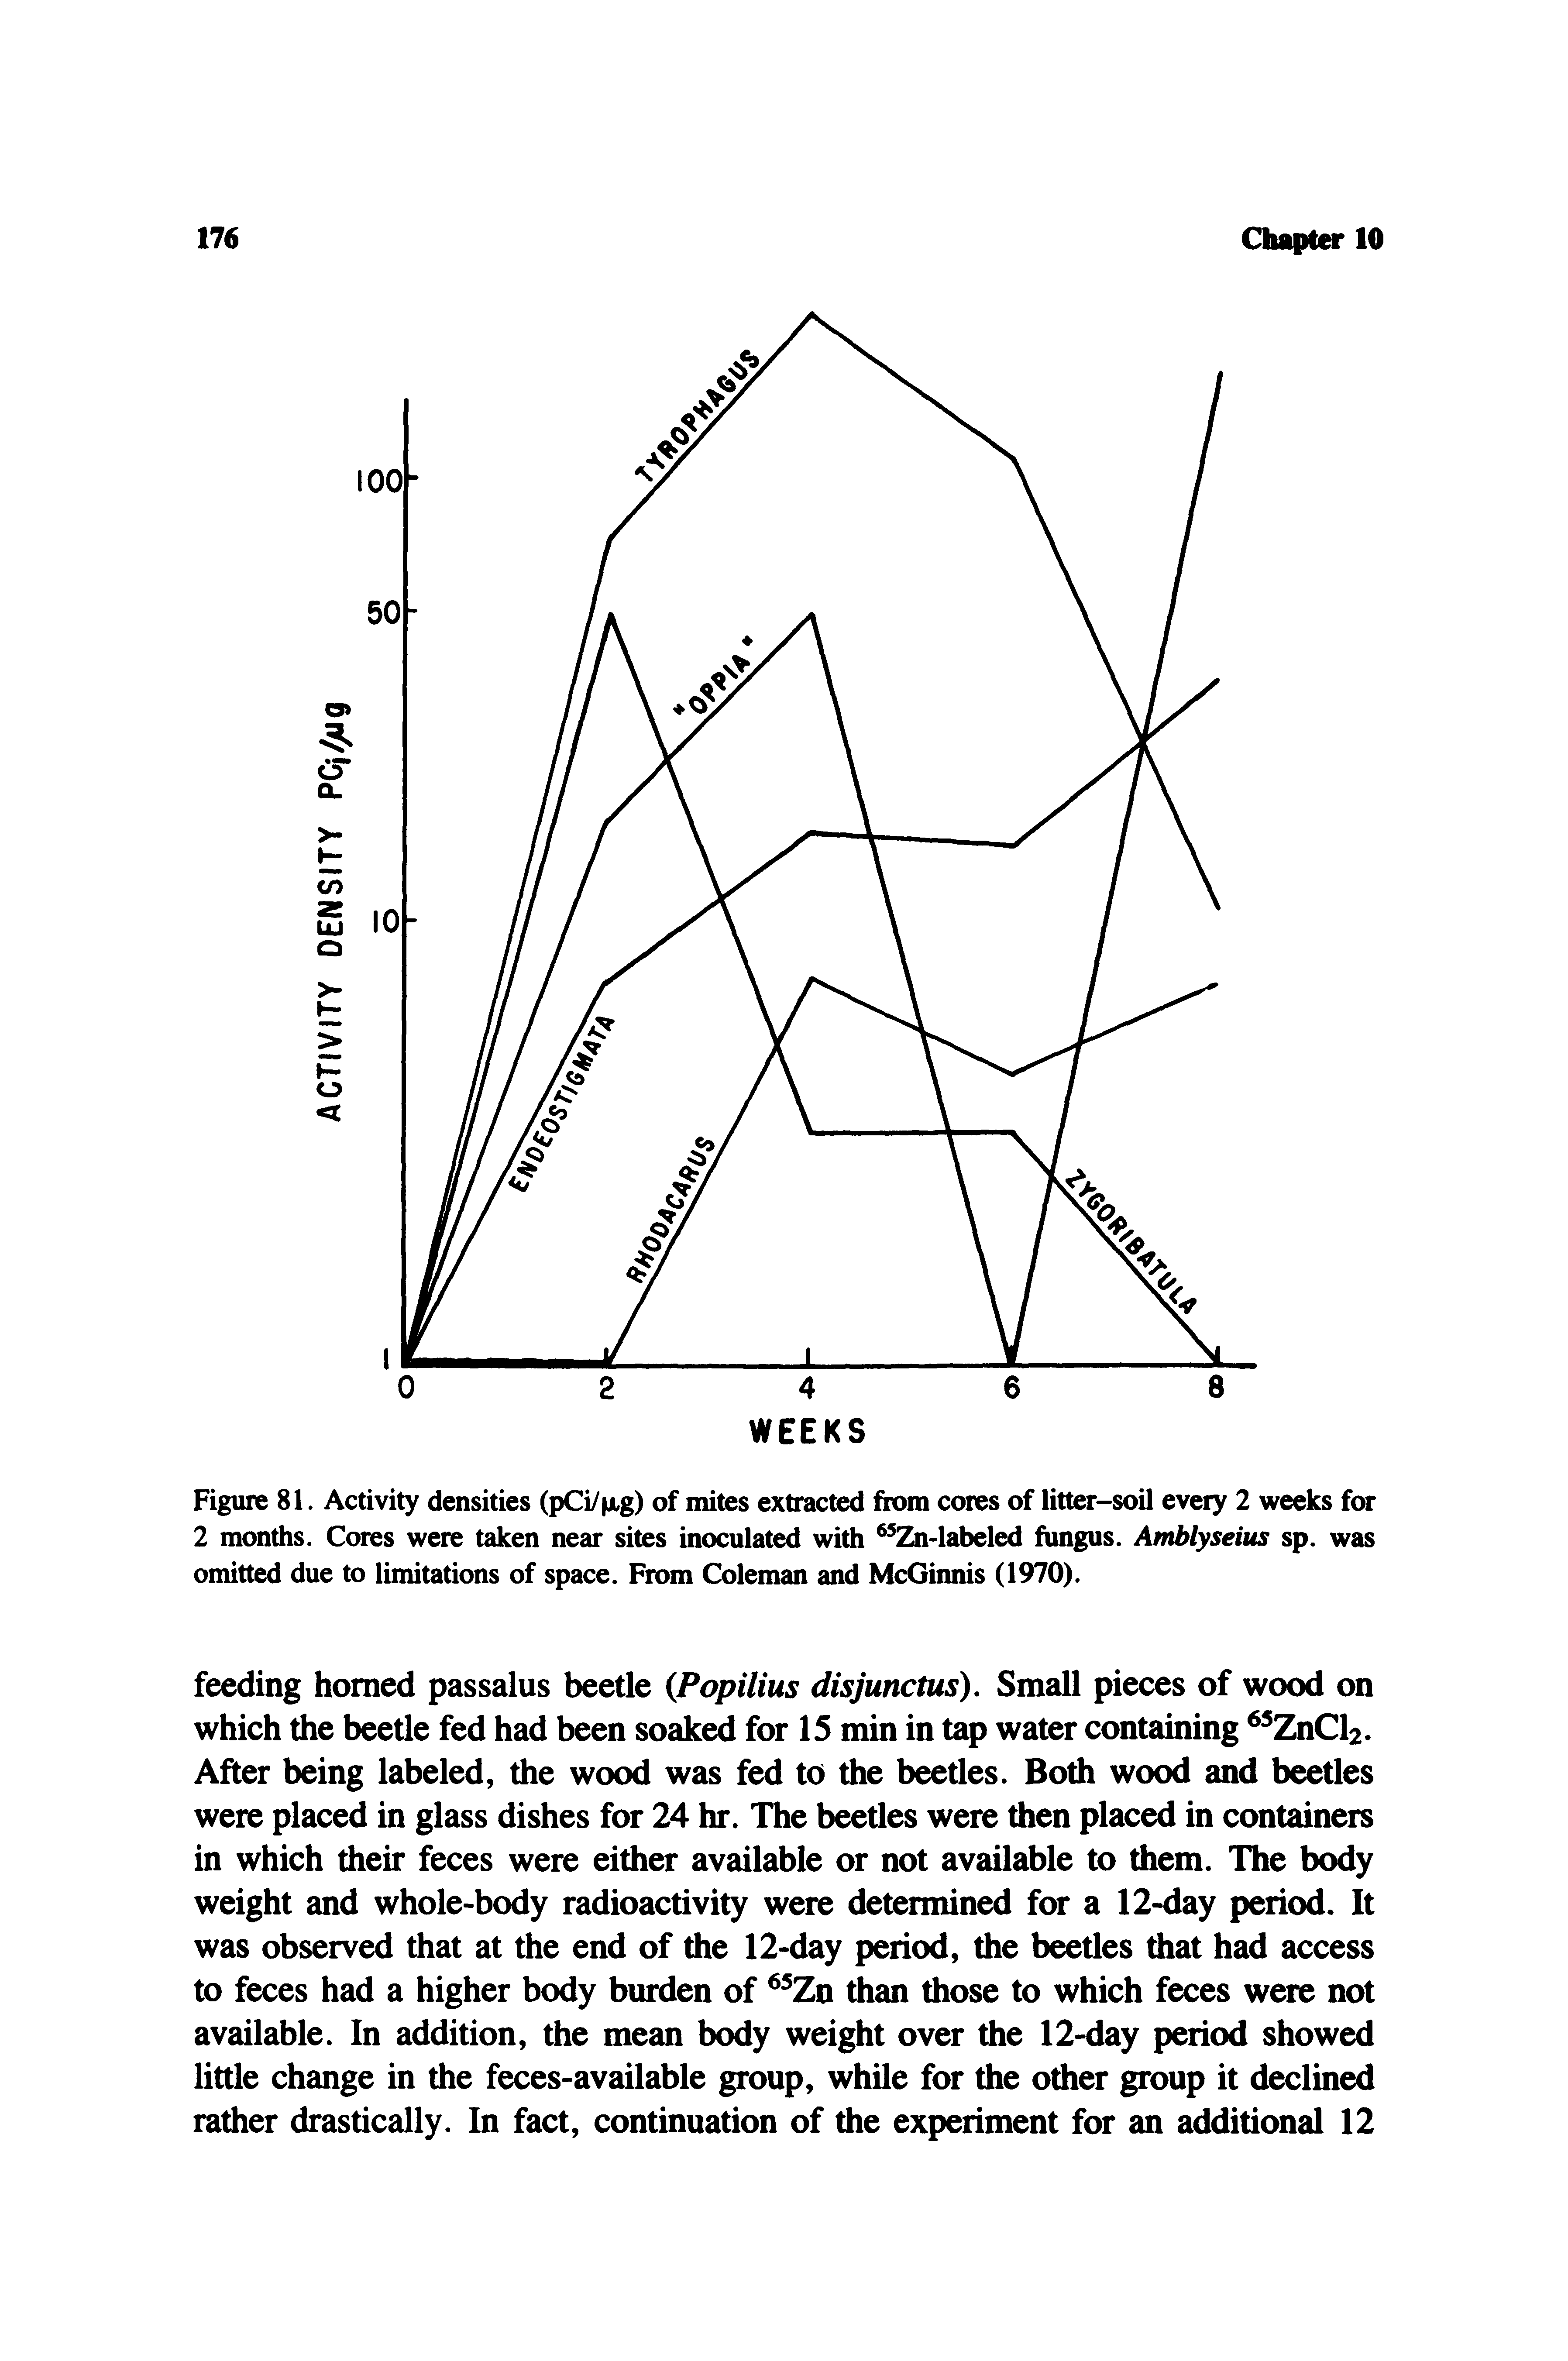 Figure 81. Activity densities (pCi/ xg) of mites extracted from cores of litter-soil every 2 weeks for 2 months. Cores were taken near sites inoculated with Zn-labeled fungus. Amblyseius sp. was omitted due to limitations of space. From Coleman and McGinnis (1970).